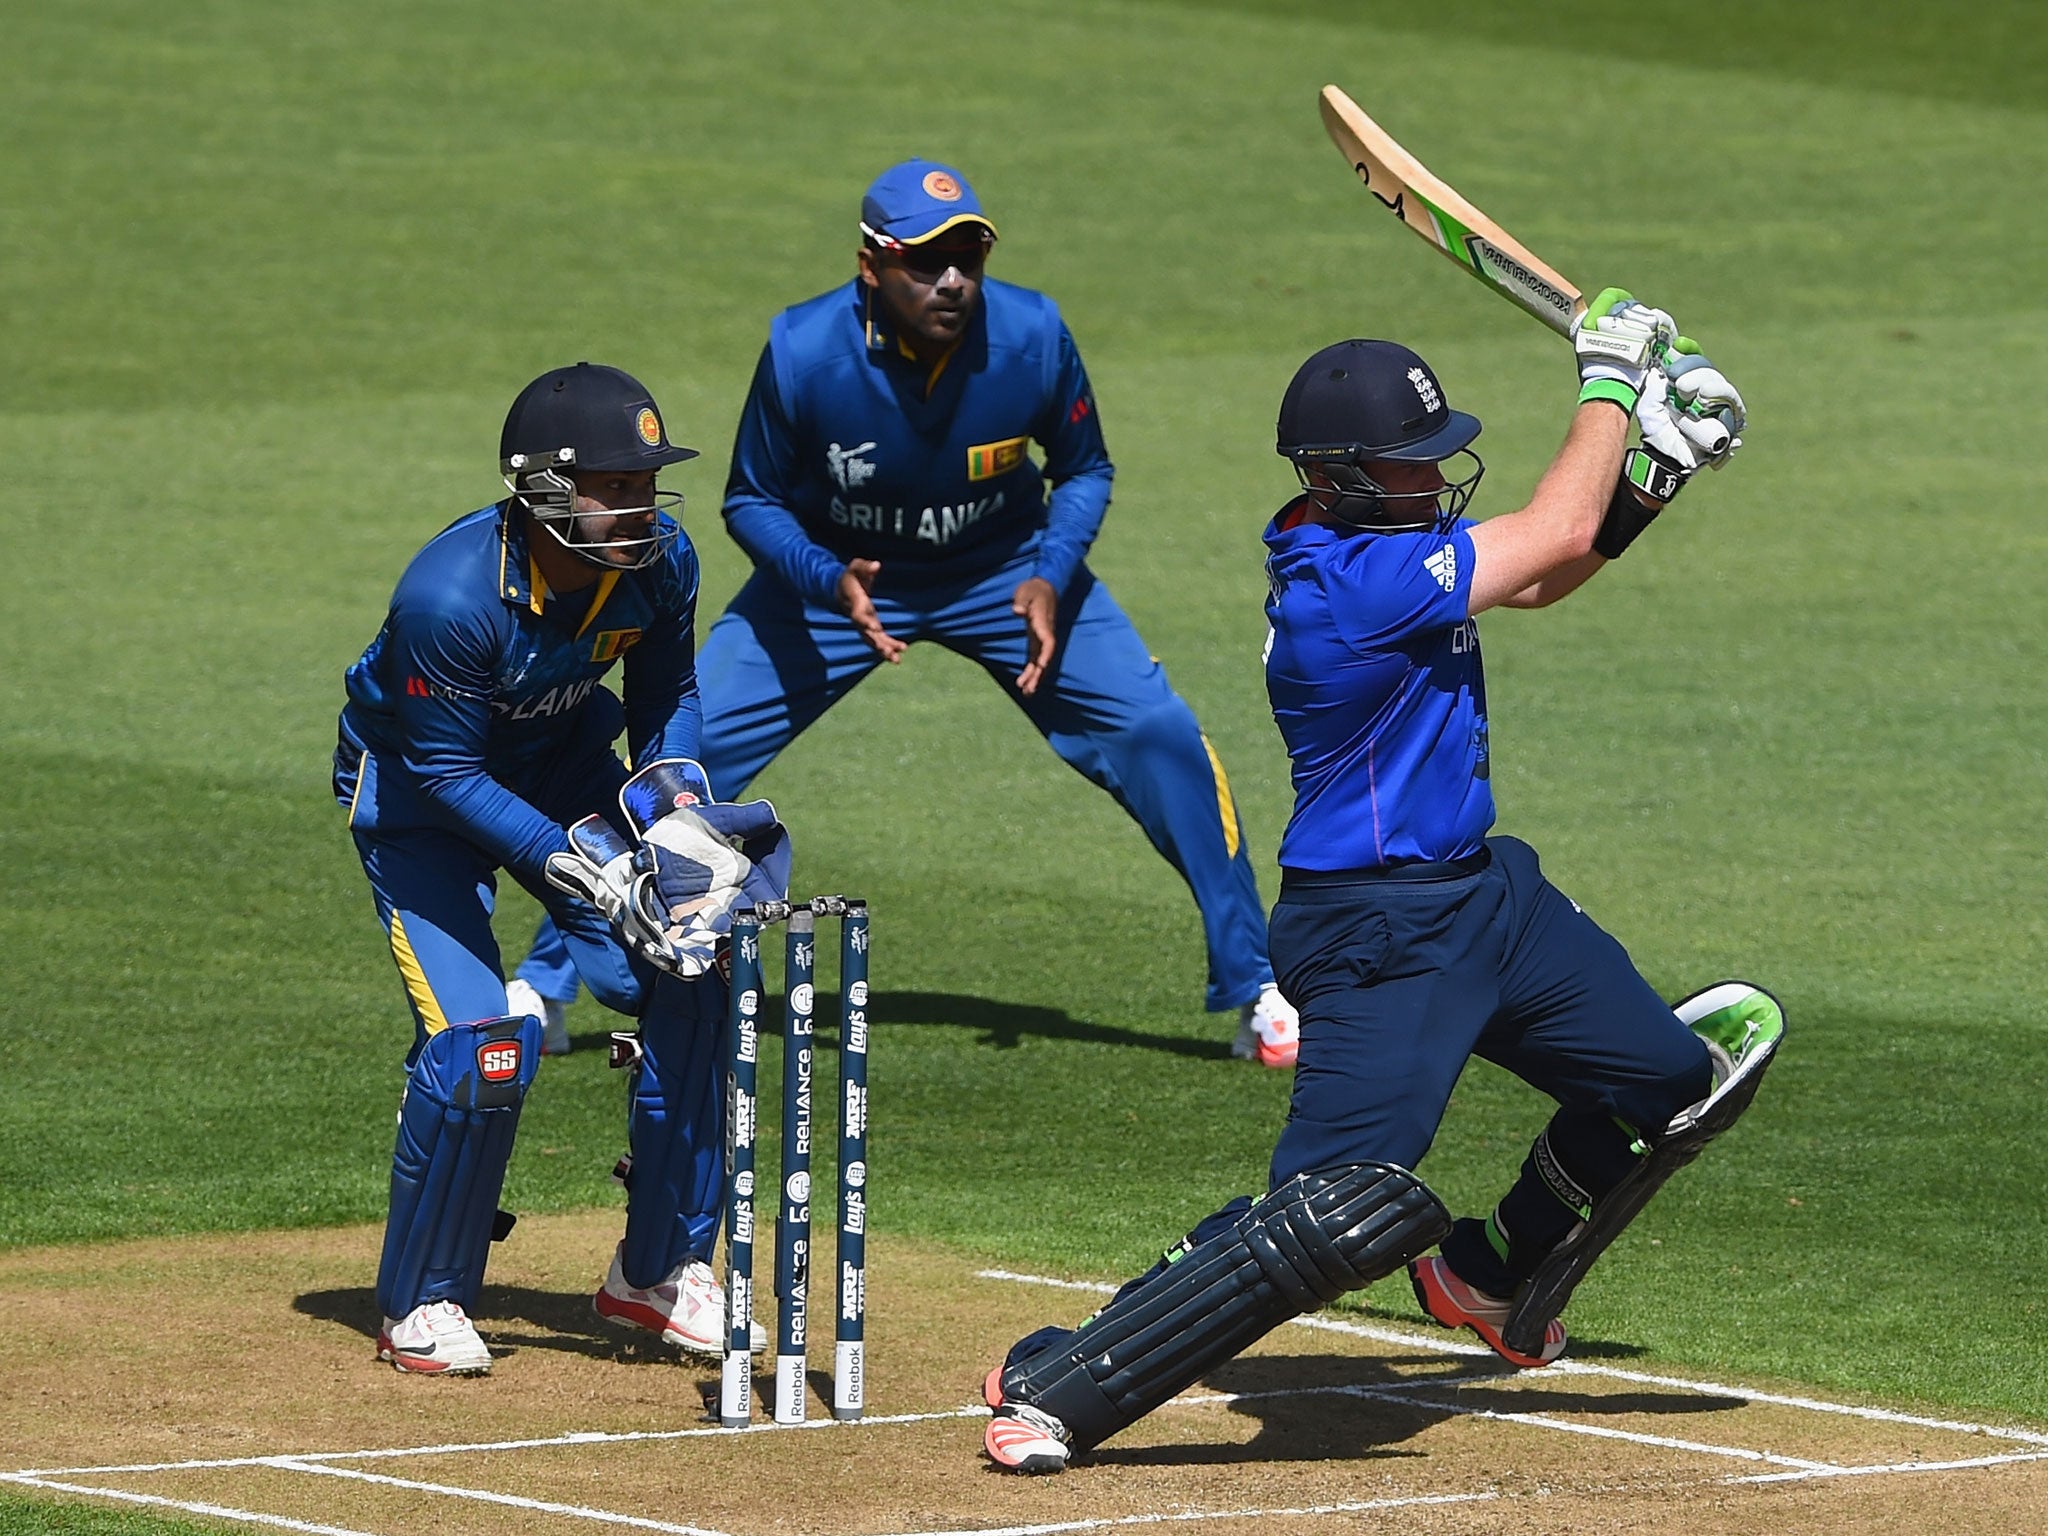 Ian Bell has failed to convert solid starts for England into big scores in this World Cup